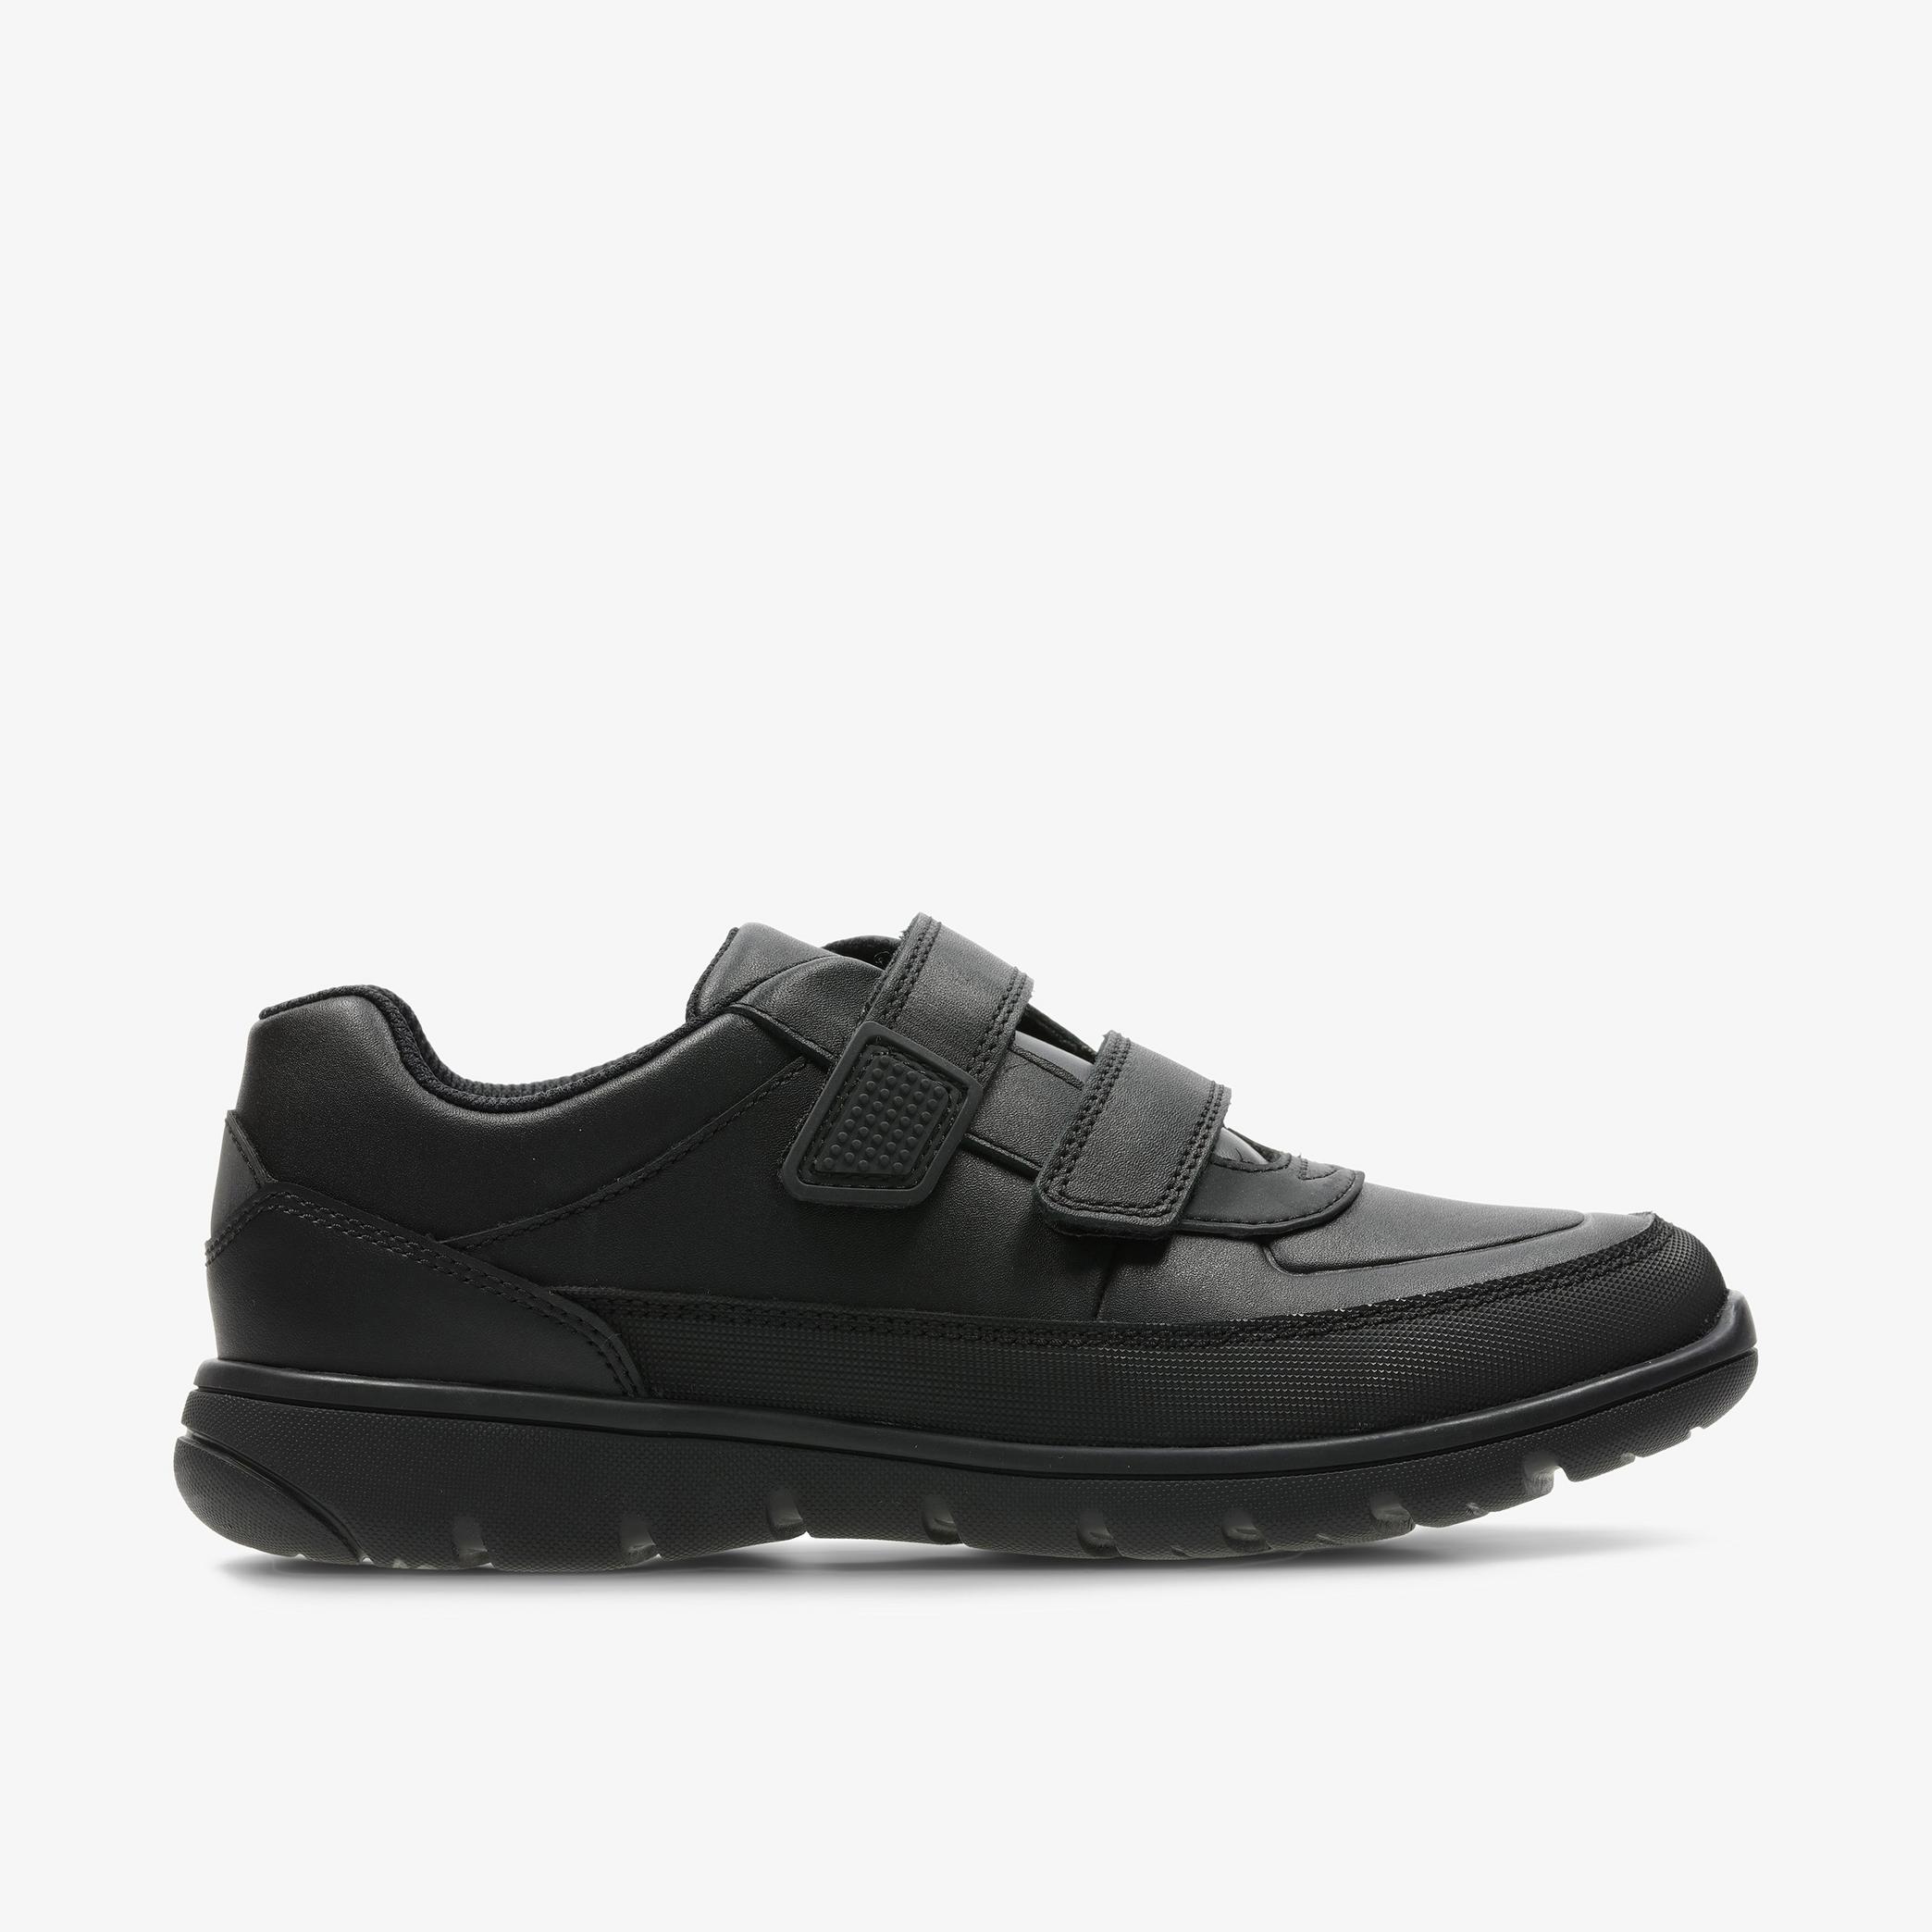 Venture Walk Kid Black Leather Shoes, view 1 of 6